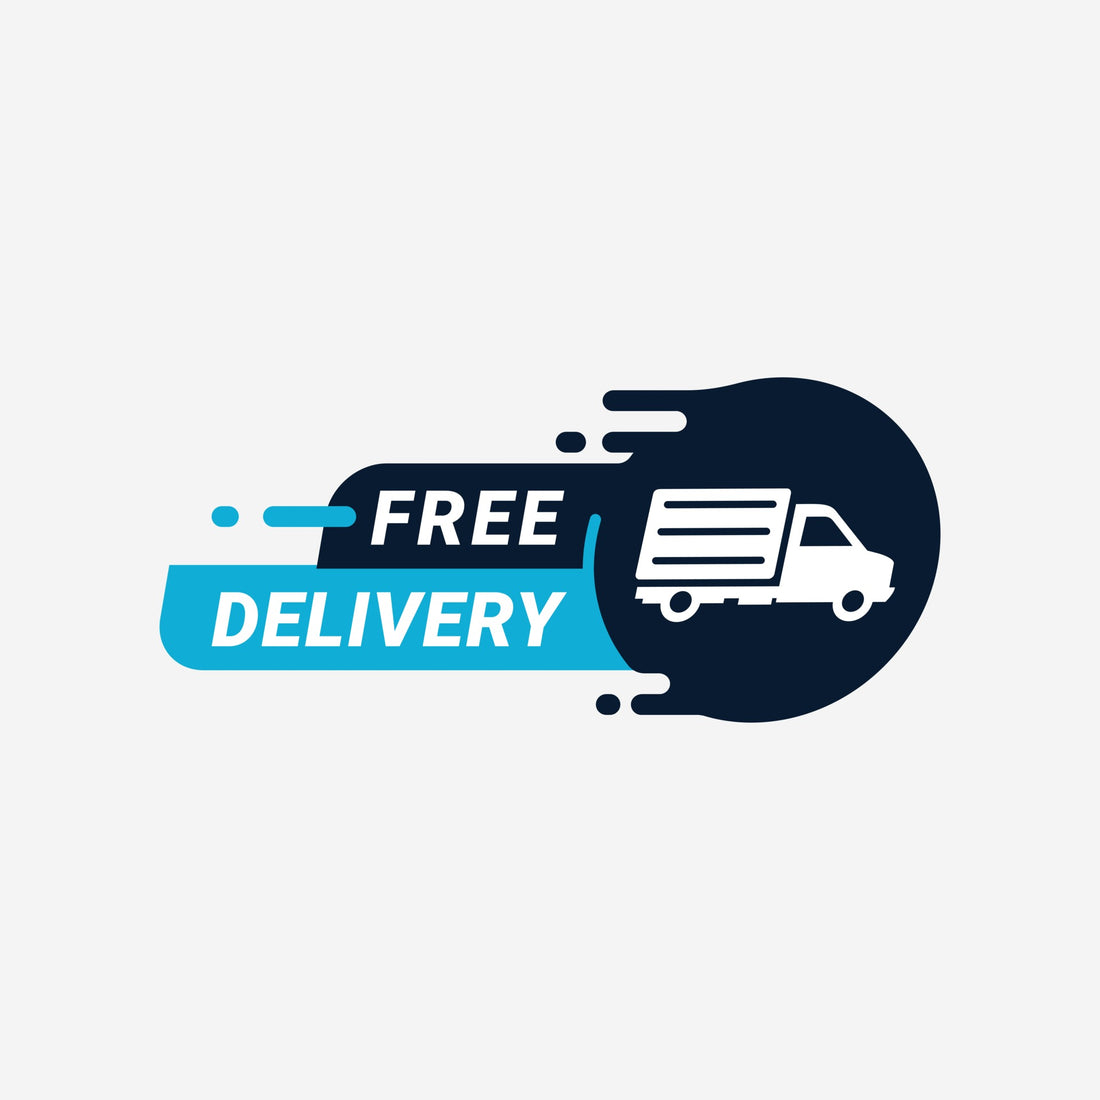 What is Free Shipping? How does it work?